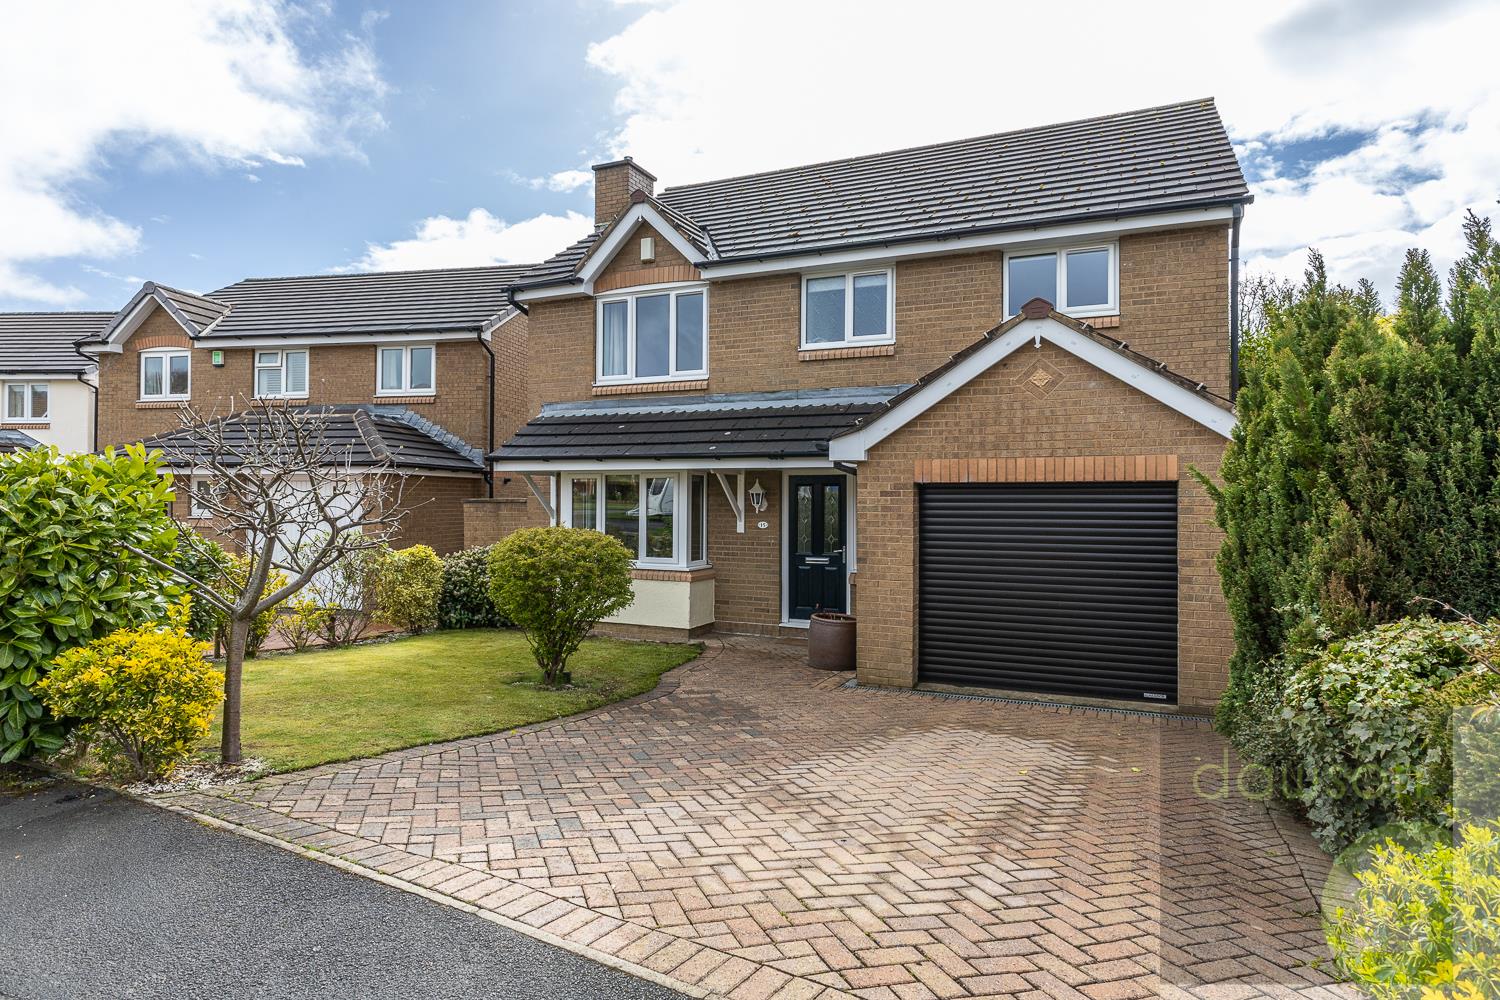 4 bed detached house for sale in Grantley Place, Huddersfield  - Property Image 1